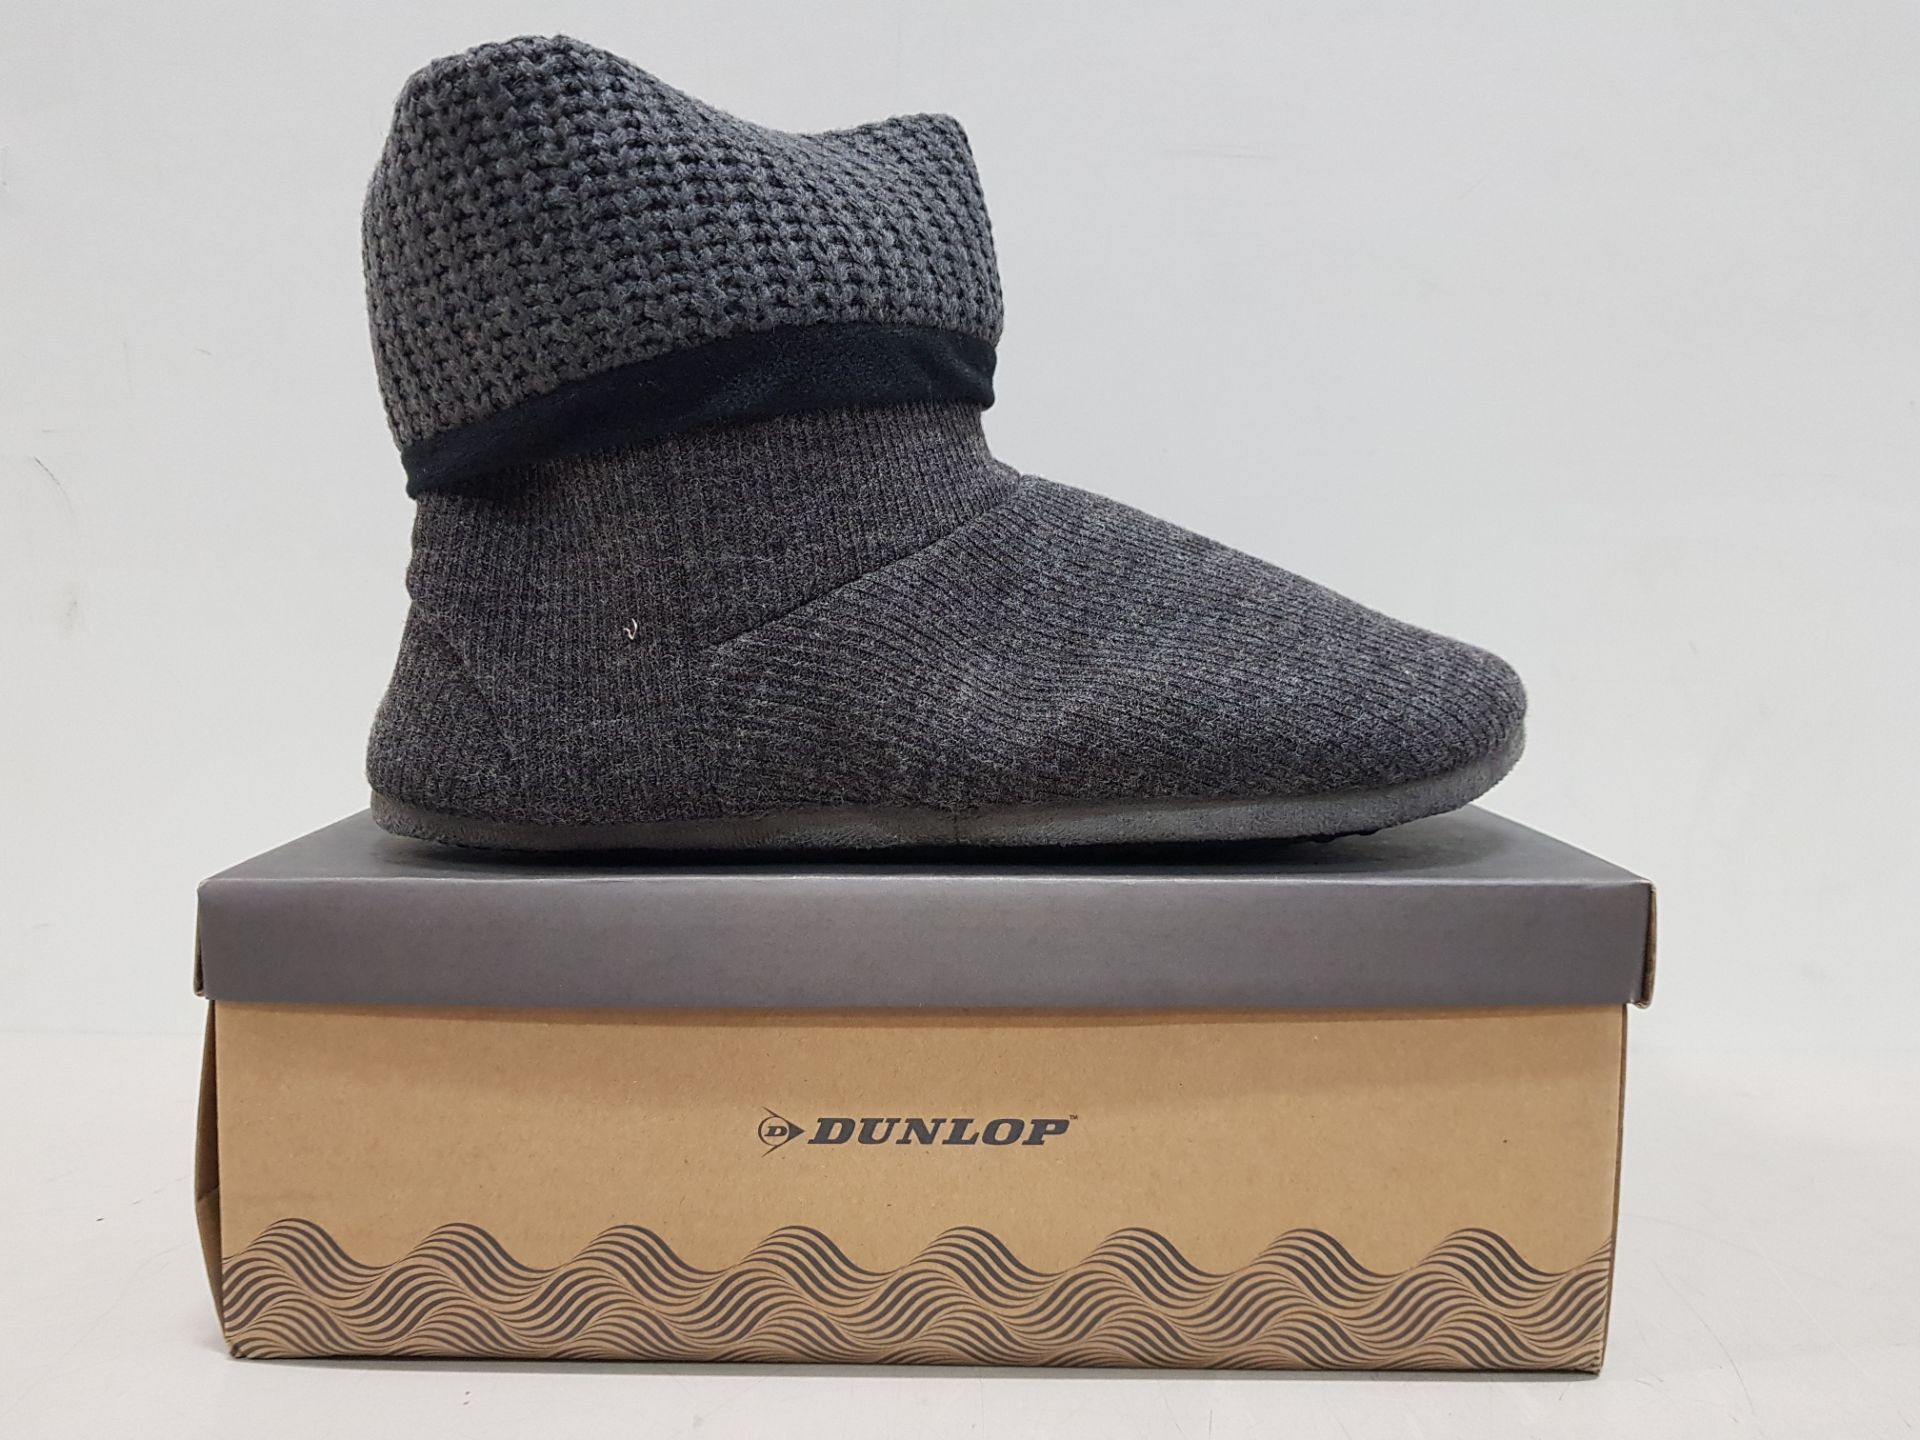 12 X BRAND NEW DUNLOP KNITTED PULL ON MEMORY FOAM INDOOR SLIPPERS -ALL IN GREY - ALL IN SIZE UK 11-